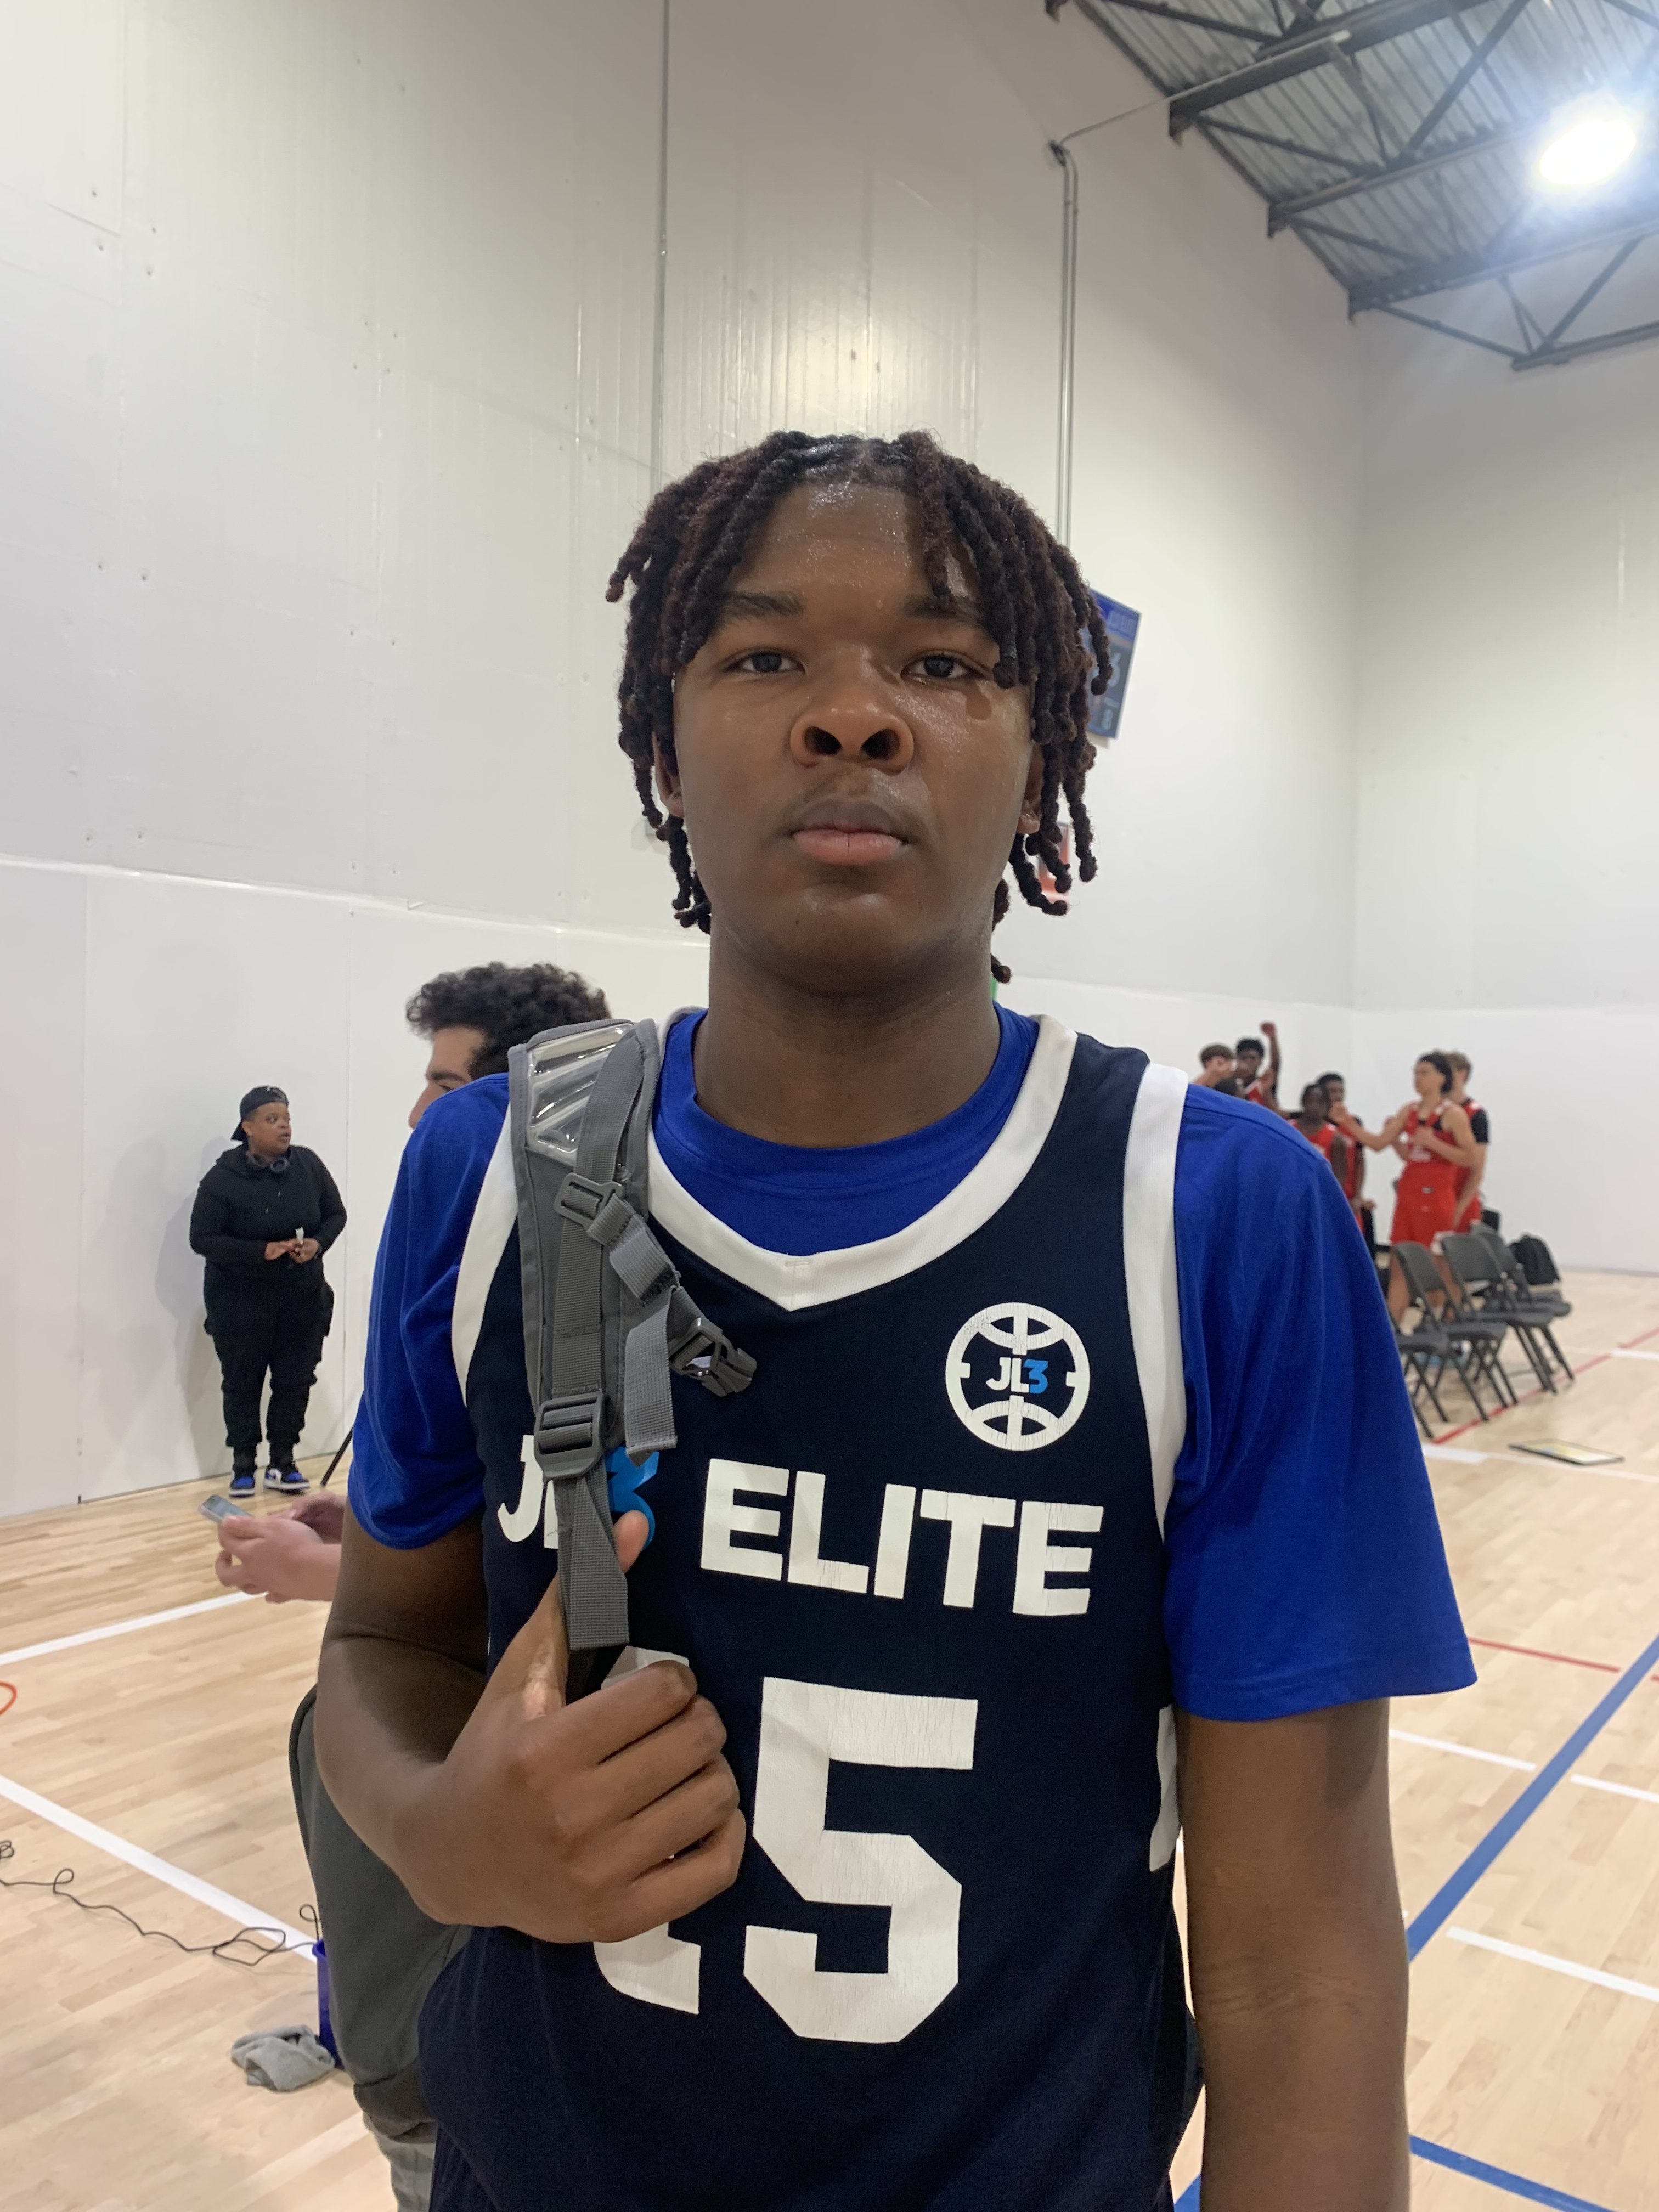 <span class="pn-tooltip pn-player-link">
        <span class="name-pointer">JR EYBL: Dallas Standouts with Film</span>
        <span class="info-box not-prose" style="background: linear-gradient(to bottom, rgba(247,101,23, 0.95) 0%,rgba(247,101,23, 1) 100%)">
            <a href="https://prephoops.com/2024/04/jr-eybl-dallas-standouts-with-film/" class="link-wrap">
                                    <span class="player-img"><img src="https://prephoops.com/wp-content/uploads/sites/2/2024/04/ARTICLE-1.jpg?w=150&h=150&crop=1" alt="JR EYBL: Dallas Standouts with Film"></span>
                
                <span class="player-details">
                    <span class="first-name">JR</span>
                    <span class="last-name">EYBL: Dallas Standouts with Film</span>
                    <span class="measurables">
                                            </span>
                                    </span>
                <span class="player-rank">
                                                        </span>
                                    <span class="state-abbr"></span>
                            </a>

            
        </span>
    </span>
